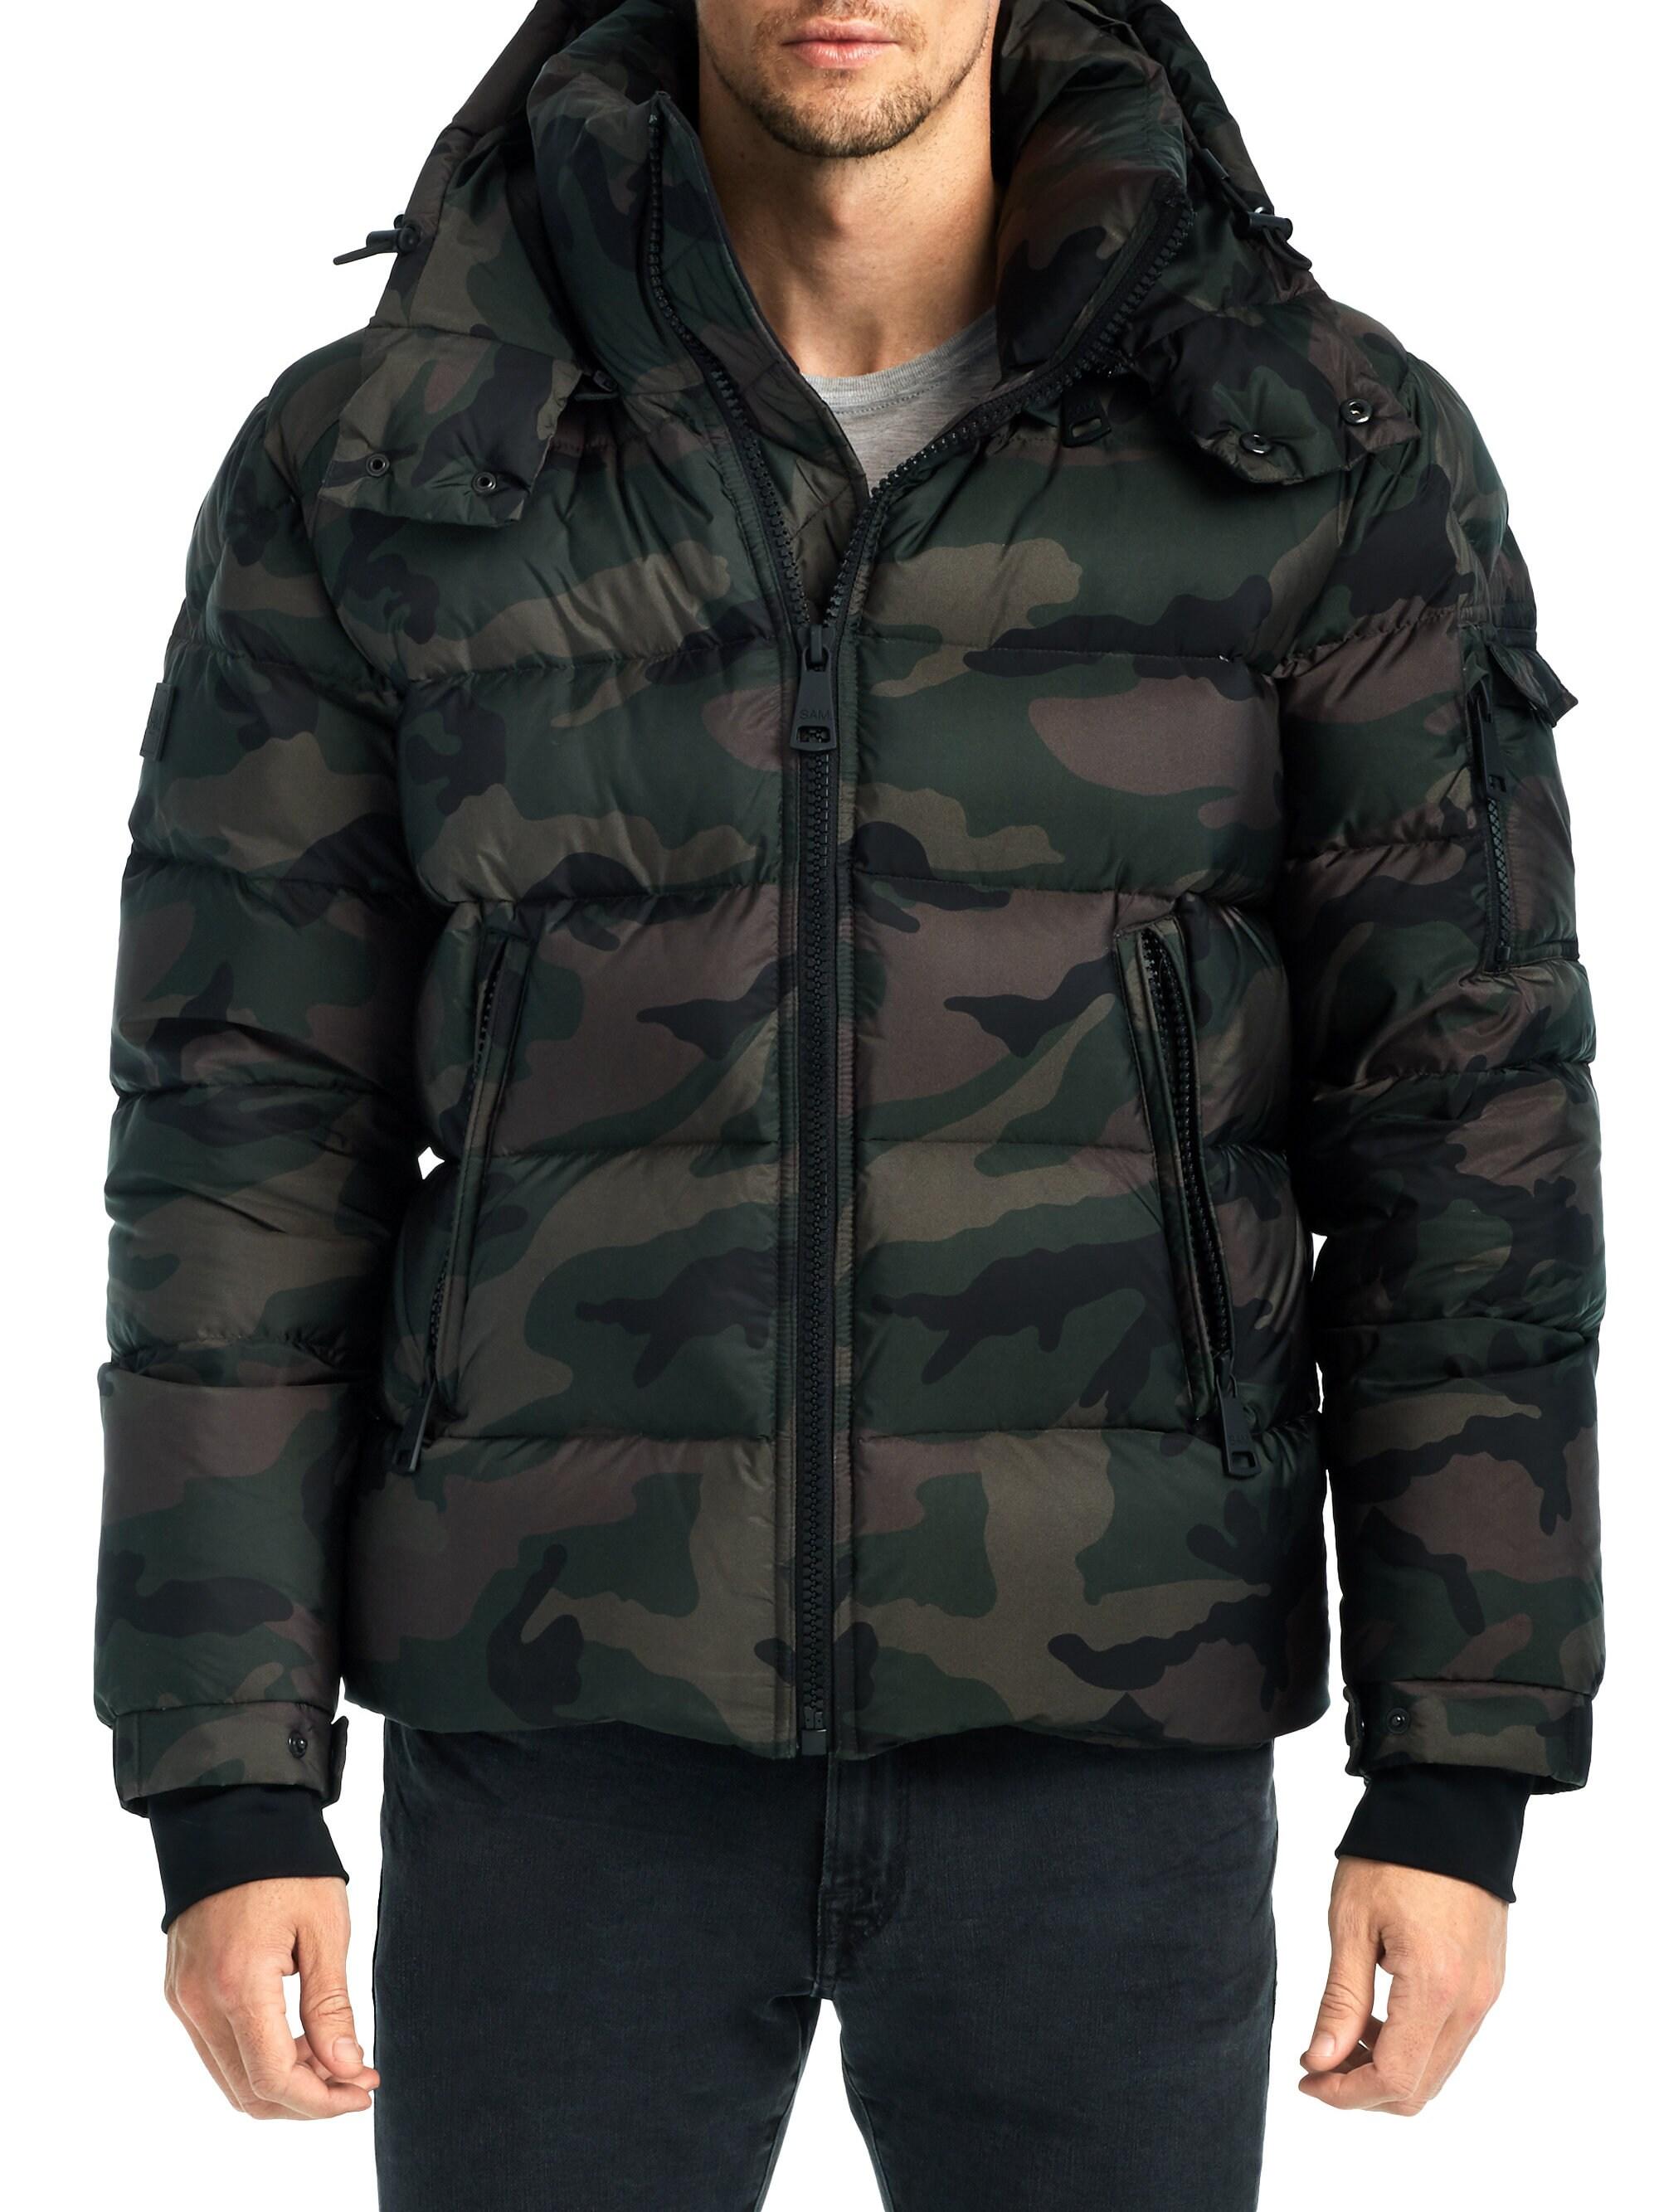 Hattfart Mens Winter Hooded Camouflage Quilted Puffer Coat Padded Jacket Parka Outwear